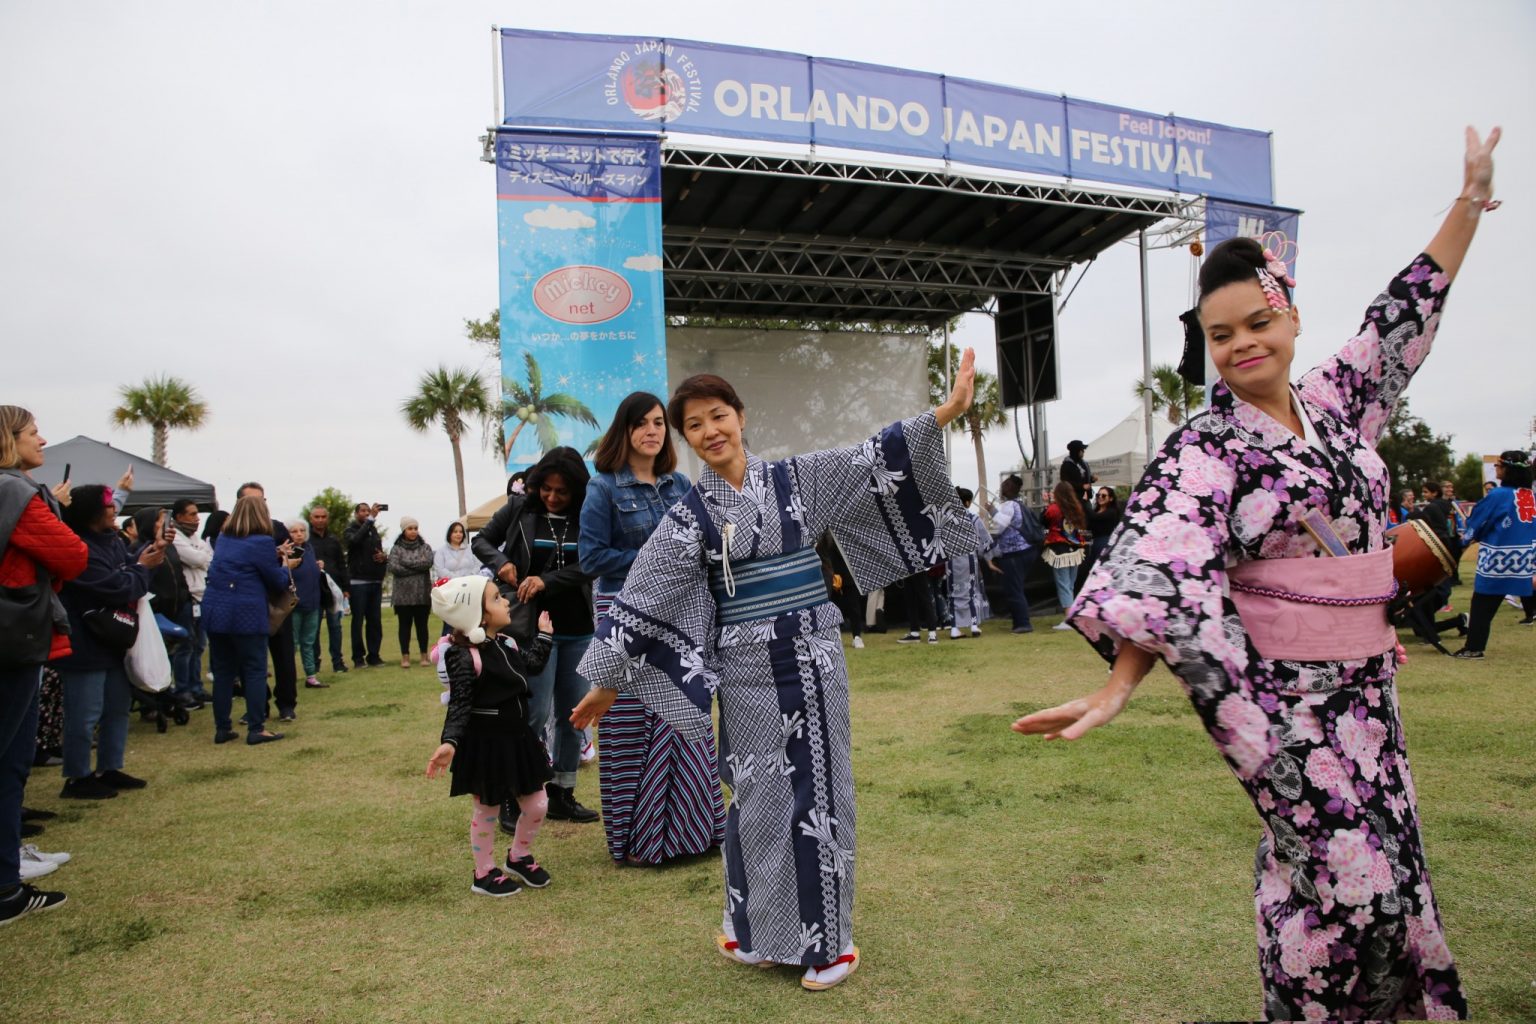 Orlando Japan Festival brings Japan Cultures to Central Florida Asia